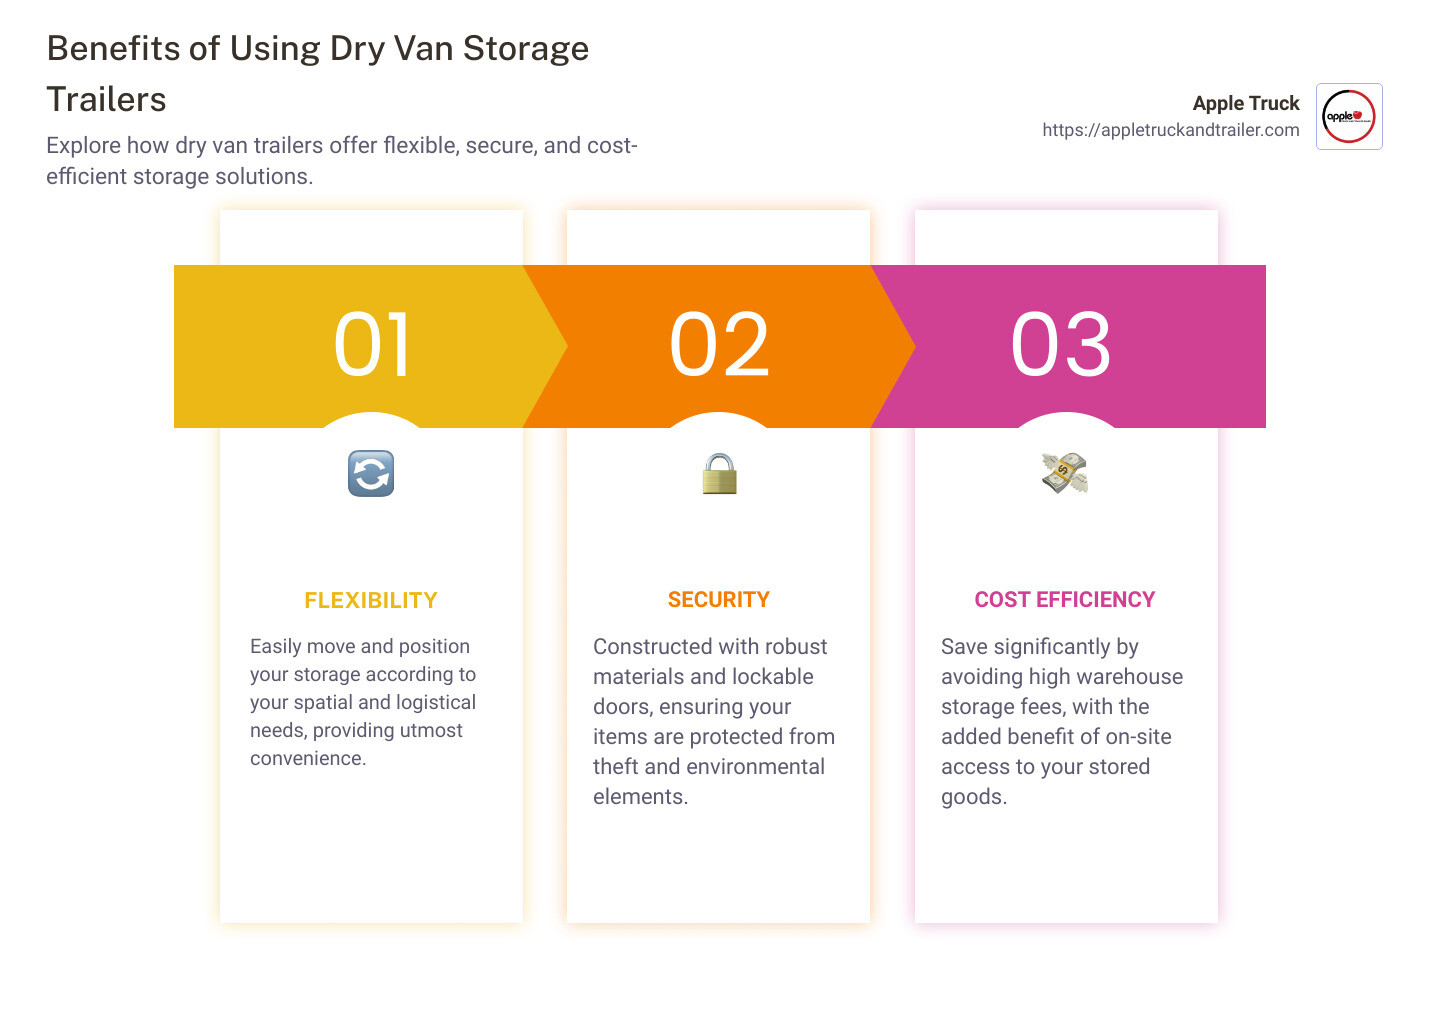 Facts and benefits of using dry van storage trailers for temporary or long-term storage, highlighting flexibility, security, and cost efficiency - dry van storage trailer rental infographic pillar-3-steps